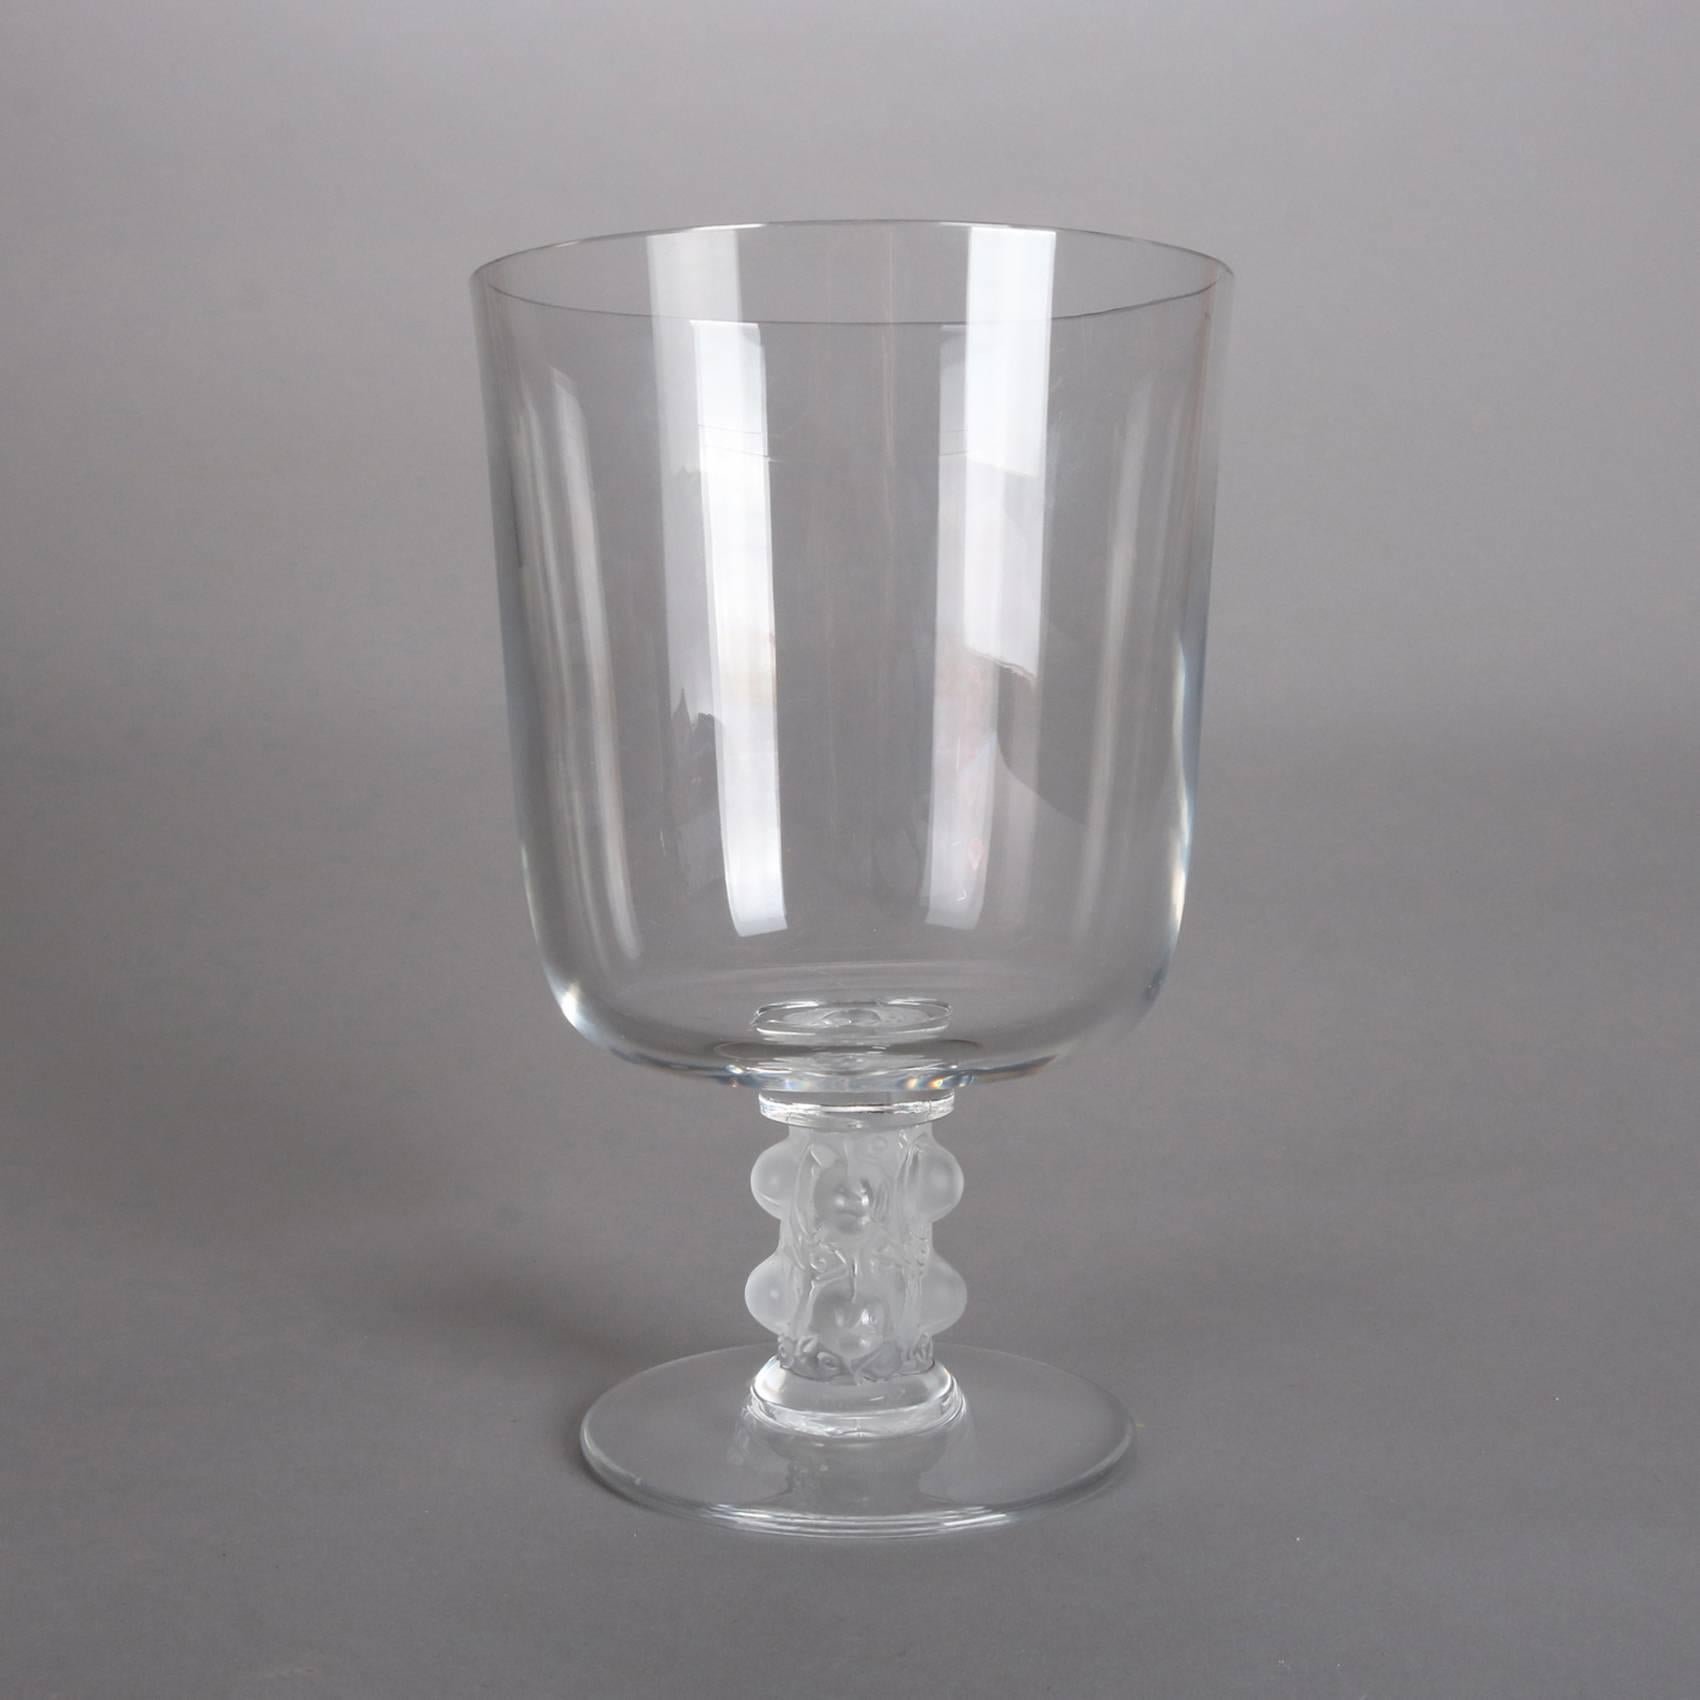 French Lalique crystal art glass chalice features frosted molded stem with clear glass cylindrical bowl, signed 